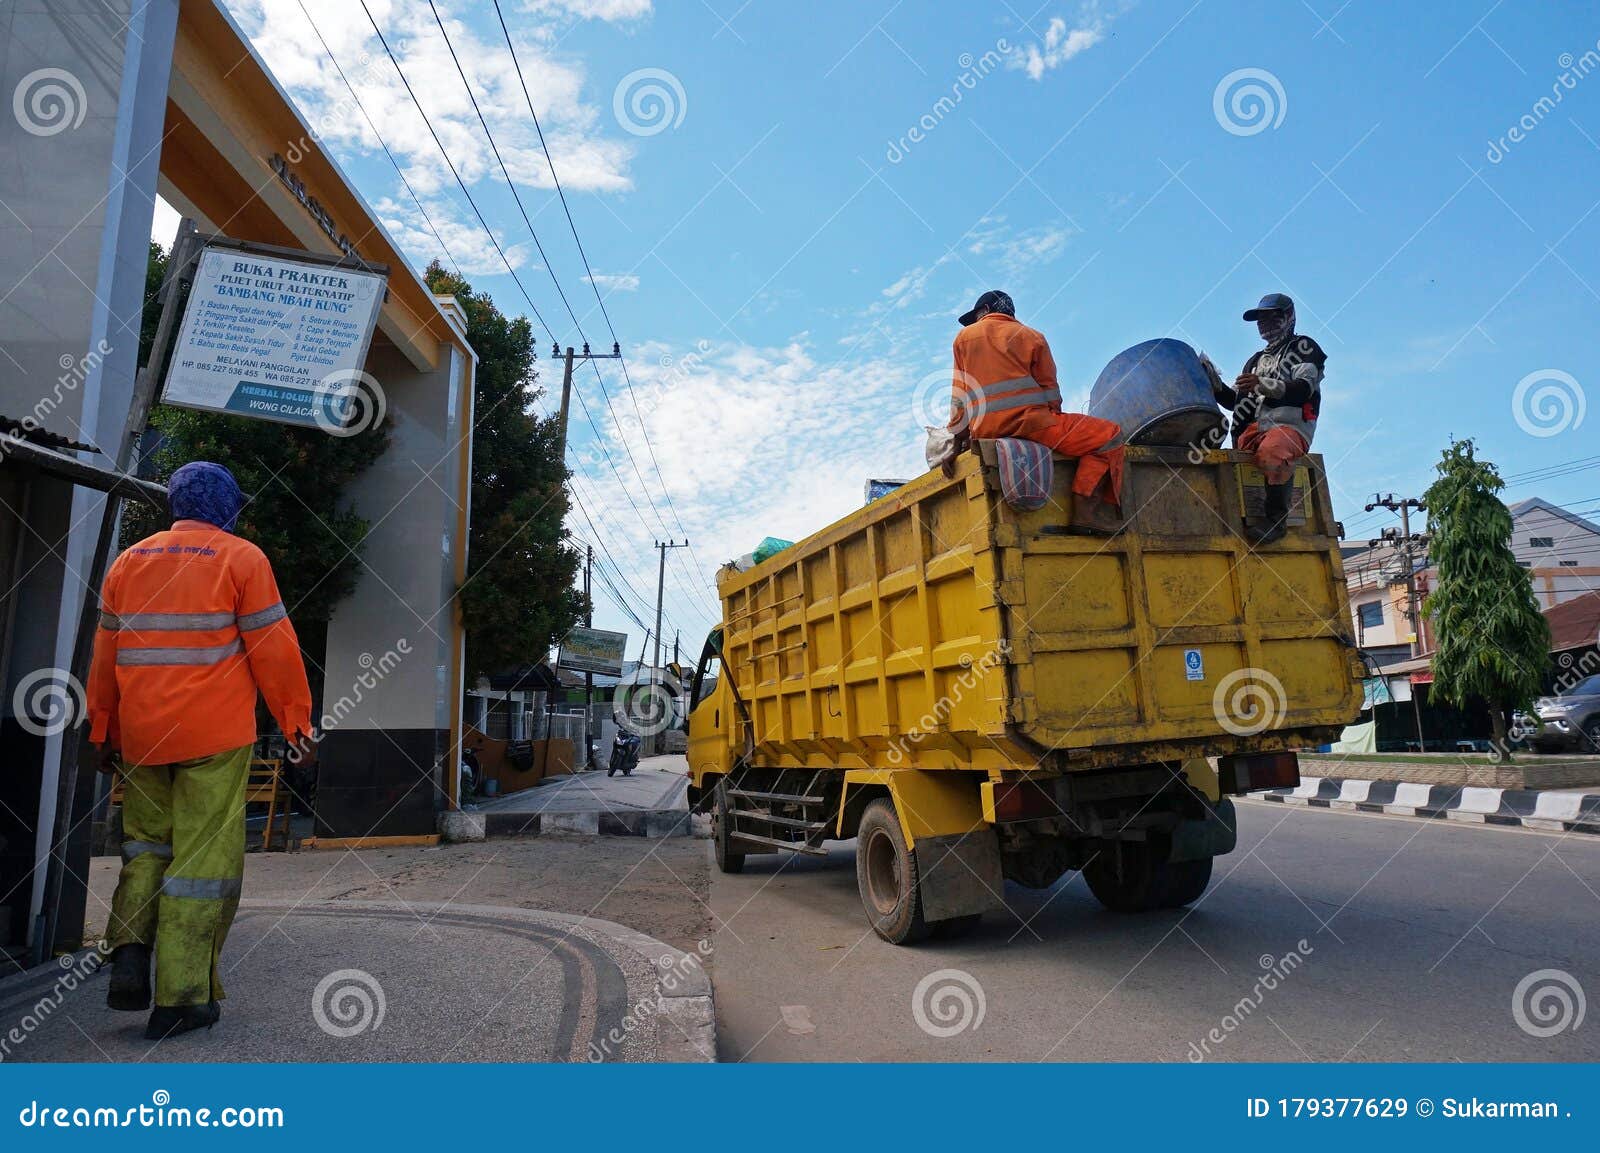 Workers Dumps a Trash Can into a Garbage Truck Editorial Stock Image -  Image of industry, junk: 179377629